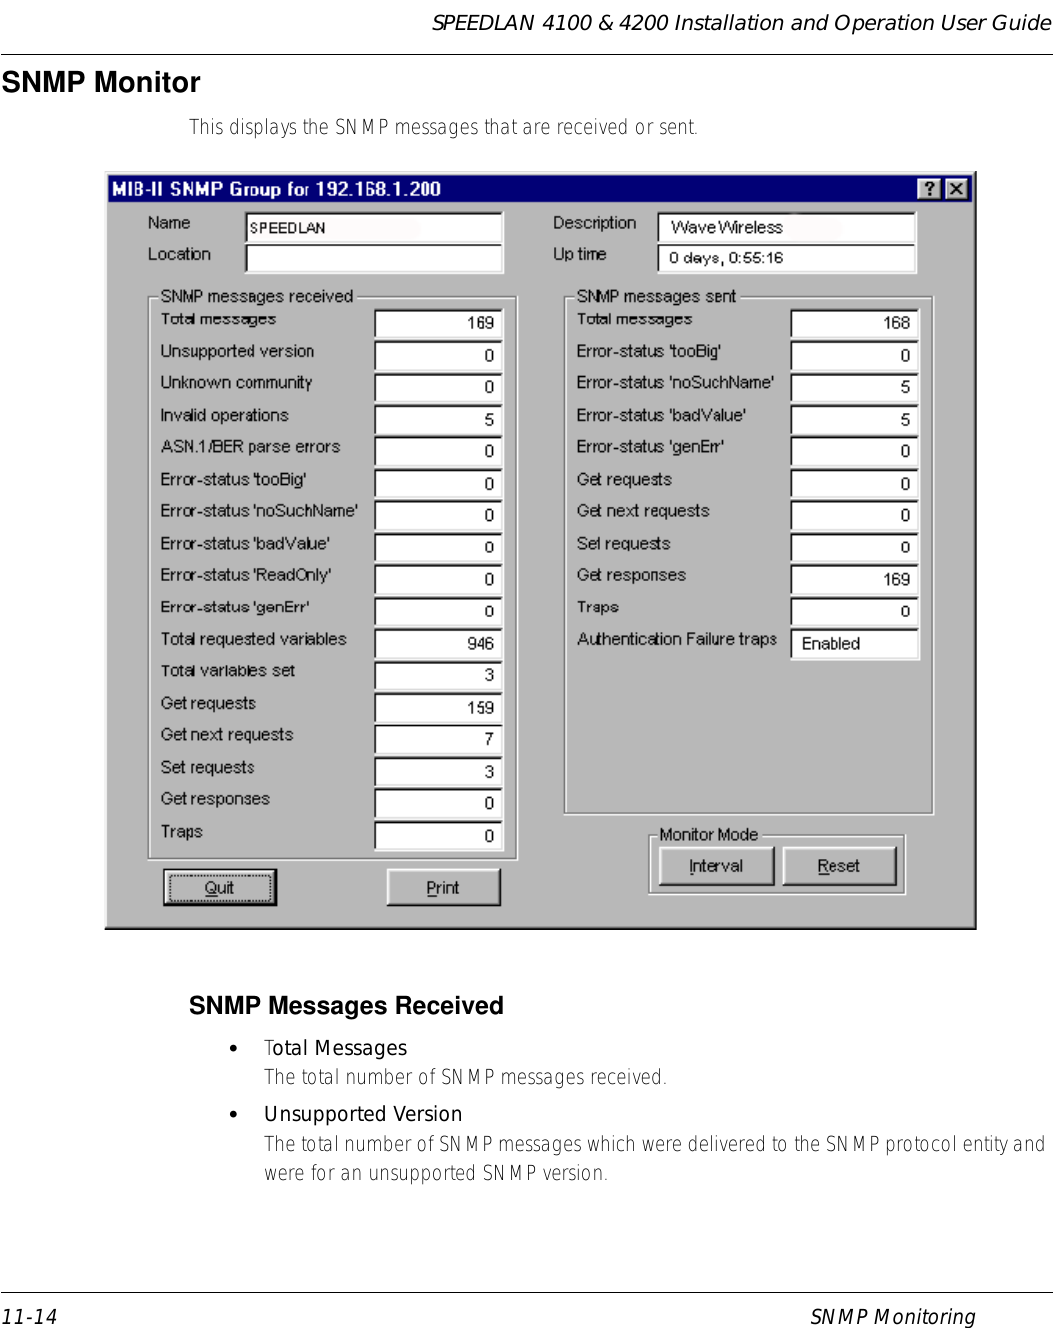 SPEEDLAN 4100 &amp; 4200 Installation and Operation User Guide 11-14 SNMP MonitoringSNMP Monitor This displays the SNMP messages that are received or sent.SNMP Messages Received •Total MessagesThe total number of SNMP messages received. •Unsupported VersionThe total number of SNMP messages which were delivered to the SNMP protocol entity and were for an unsupported SNMP version. 